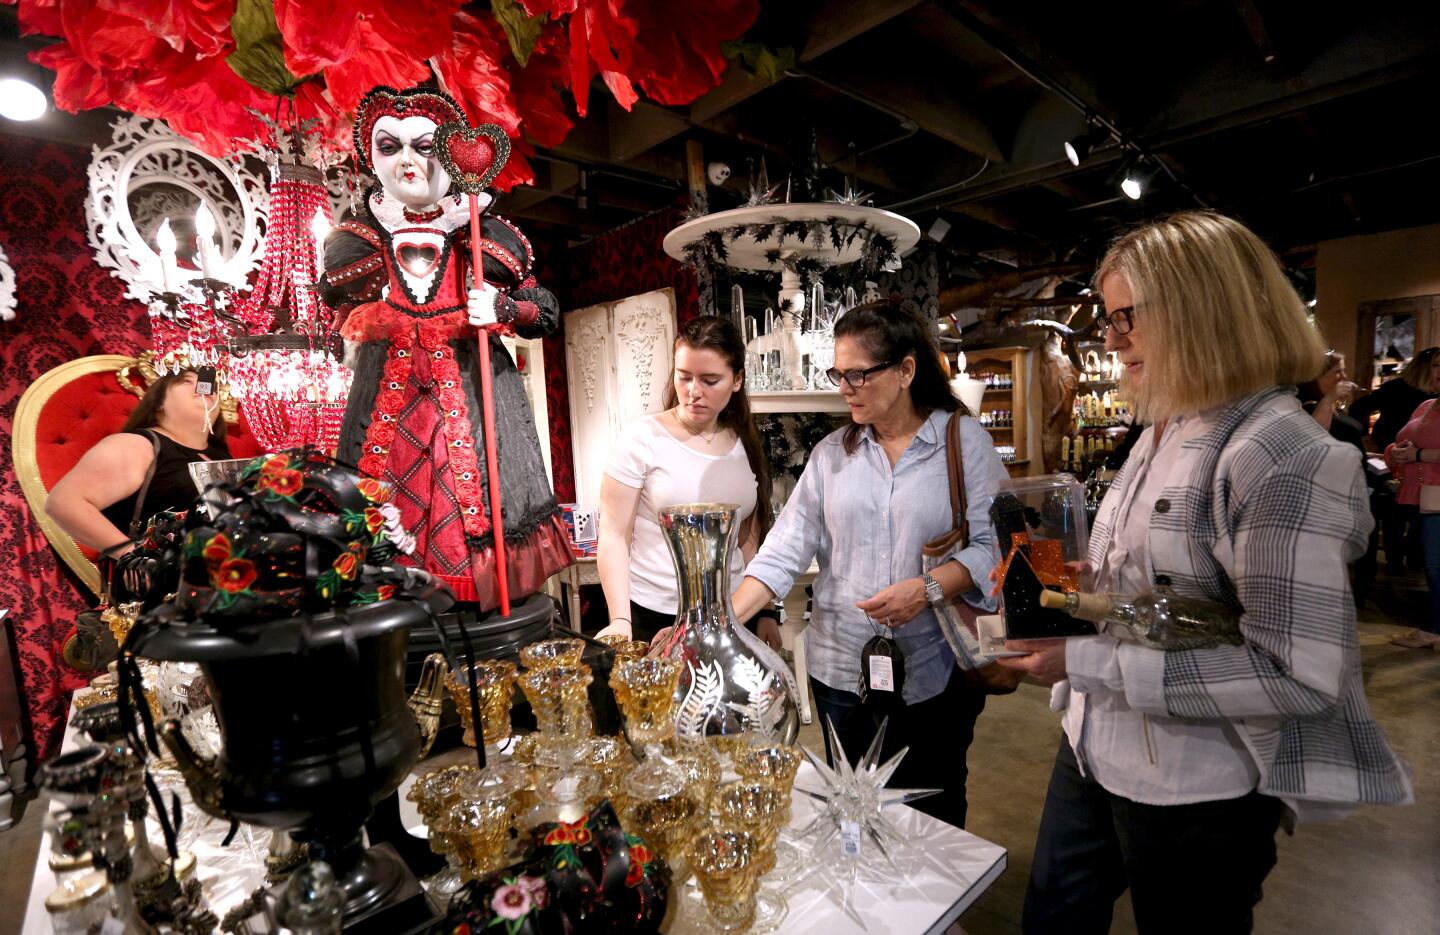 From left, Kate and Cynthia Evans, both of Laguna Niguel, and Karen Nixon of Irvine browse items at the Queen of Hearts display during a preview of Roger's Gardens' "Malice in Wonderland" Halloween boutique, which opens to the public Friday.